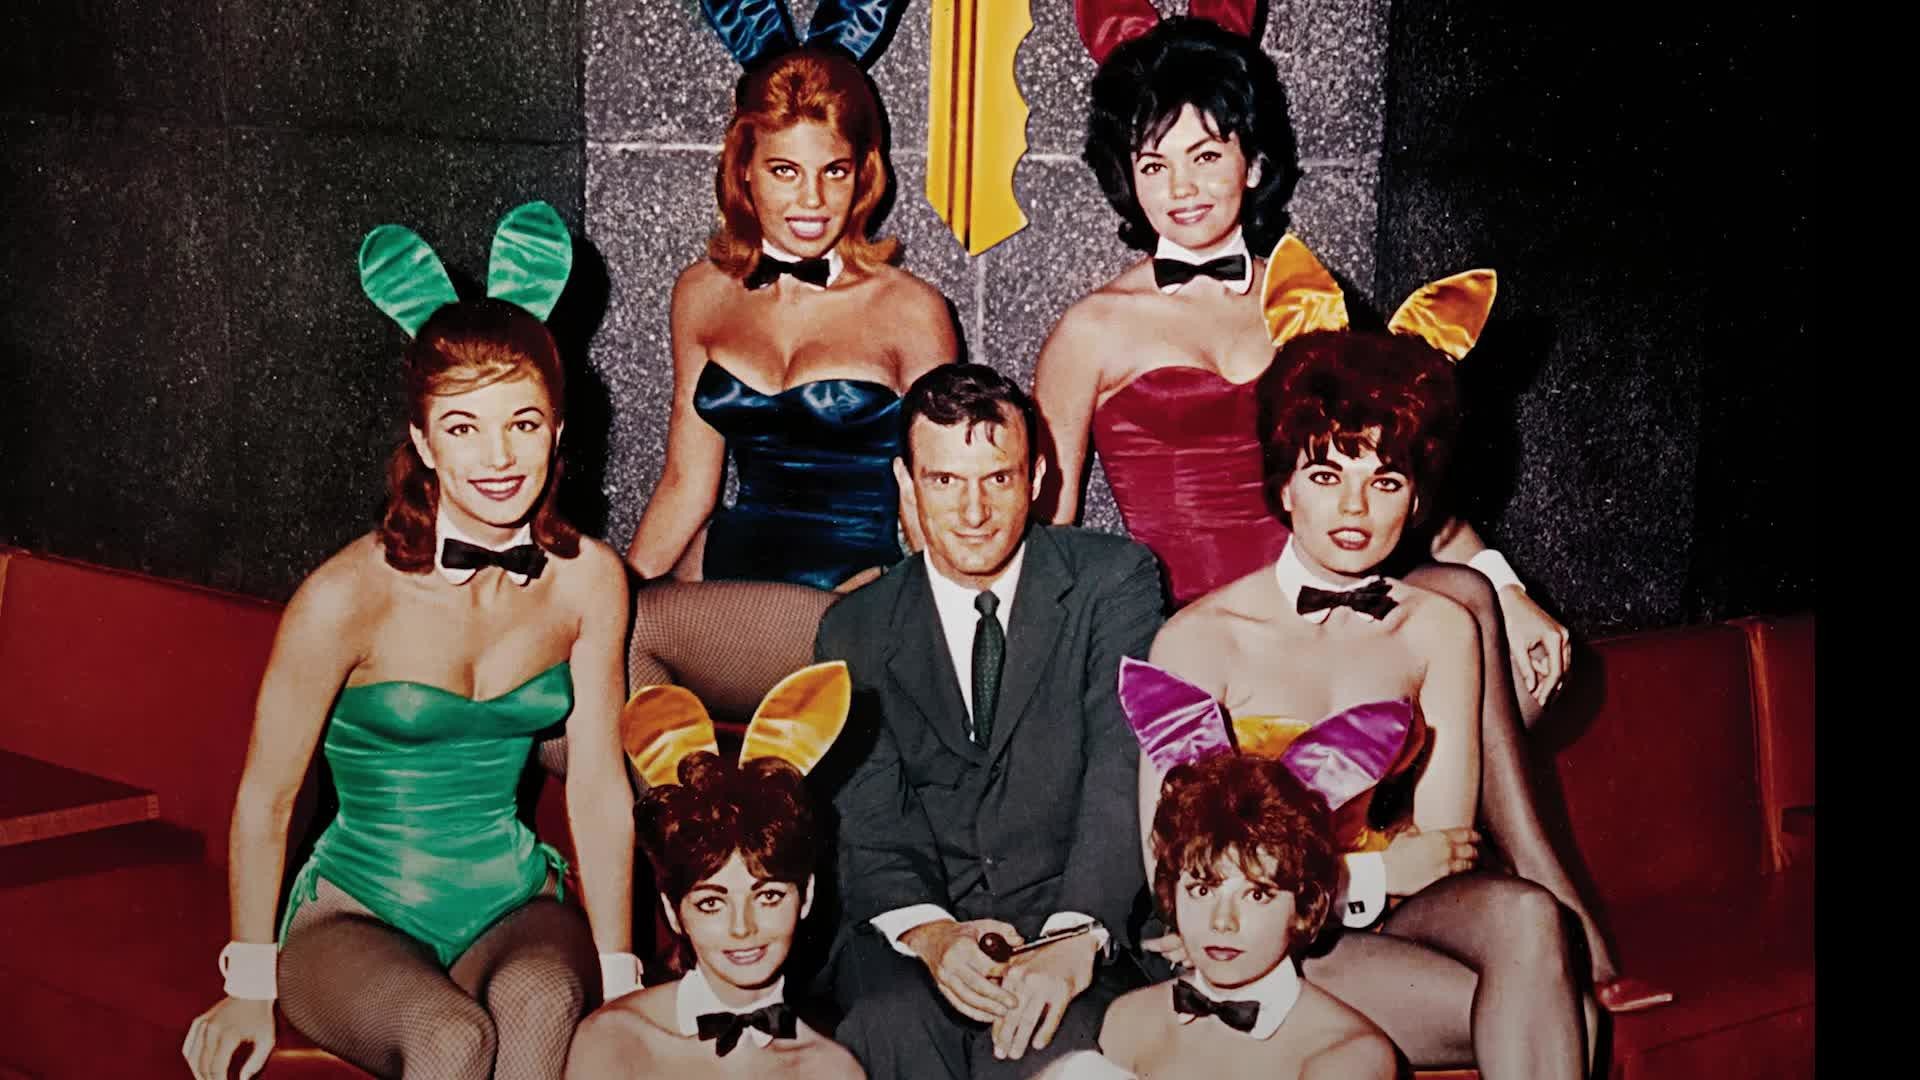 1920x1080 This is what it's REALLY like inside the Playboy Mansion - Birmingham Mail